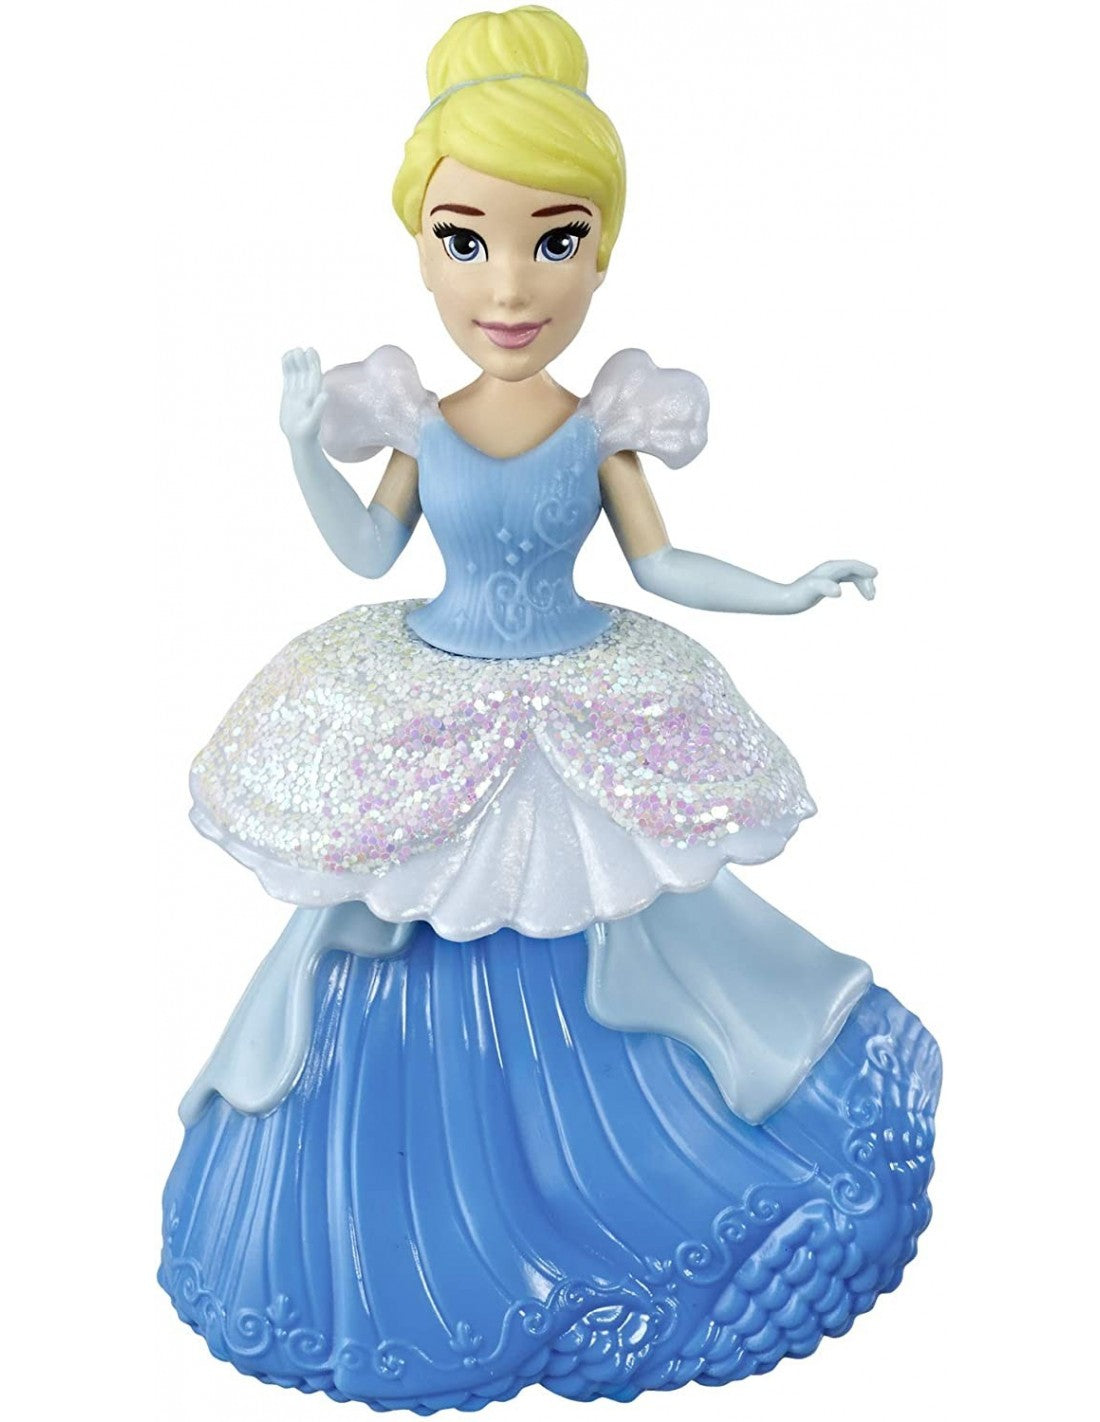 Disney Princess - Royal Clips Small Doll (Styles Vary - One Supplied)